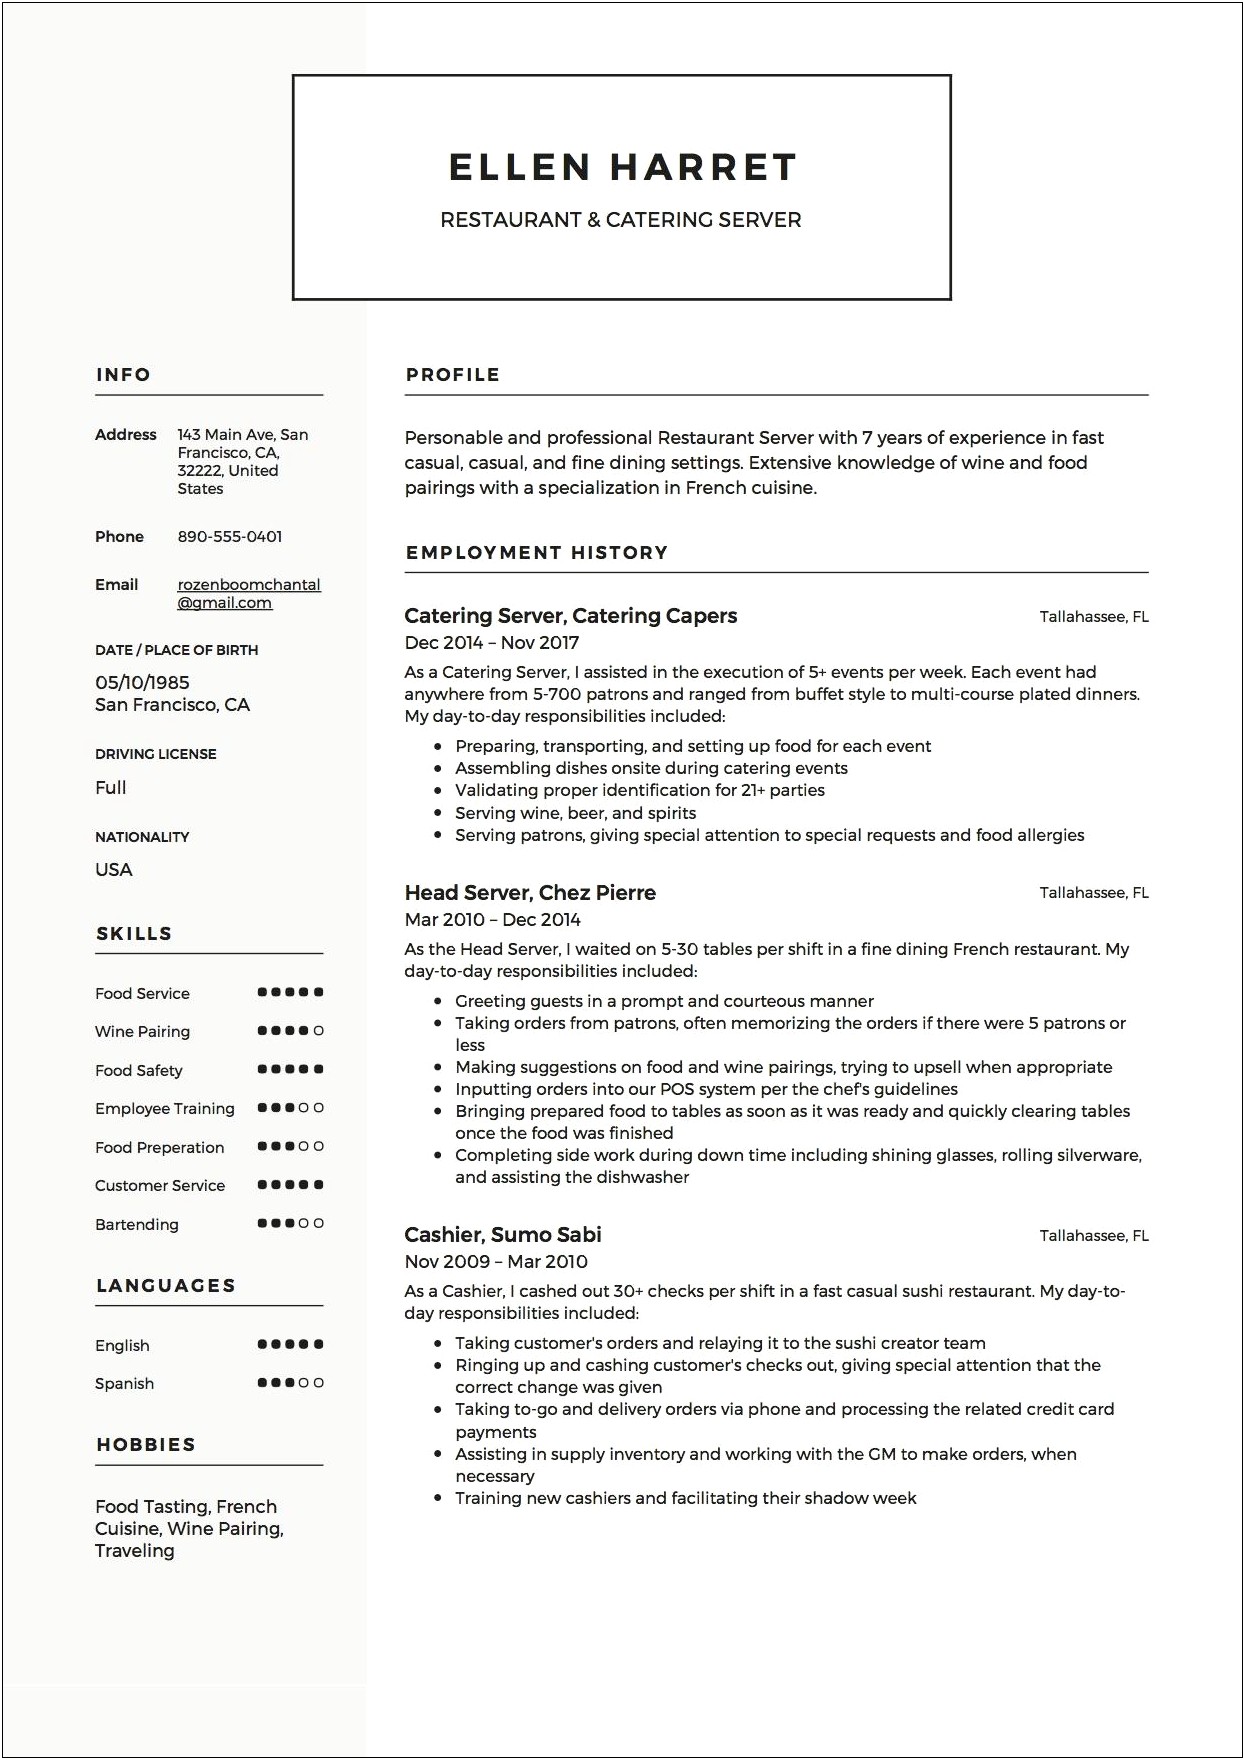 Resume Summary Sample For A Server